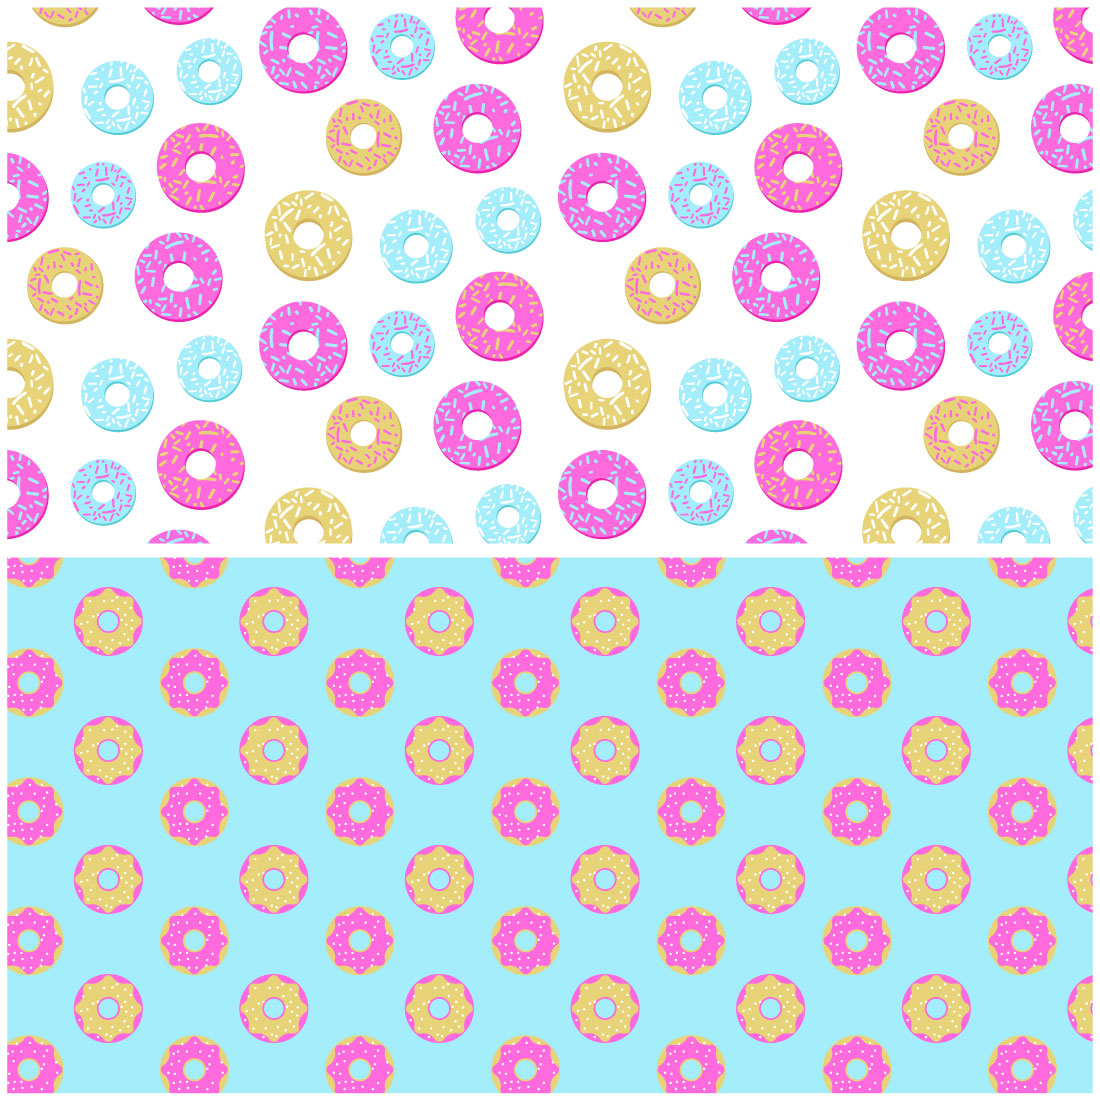 donuts patterns2 489